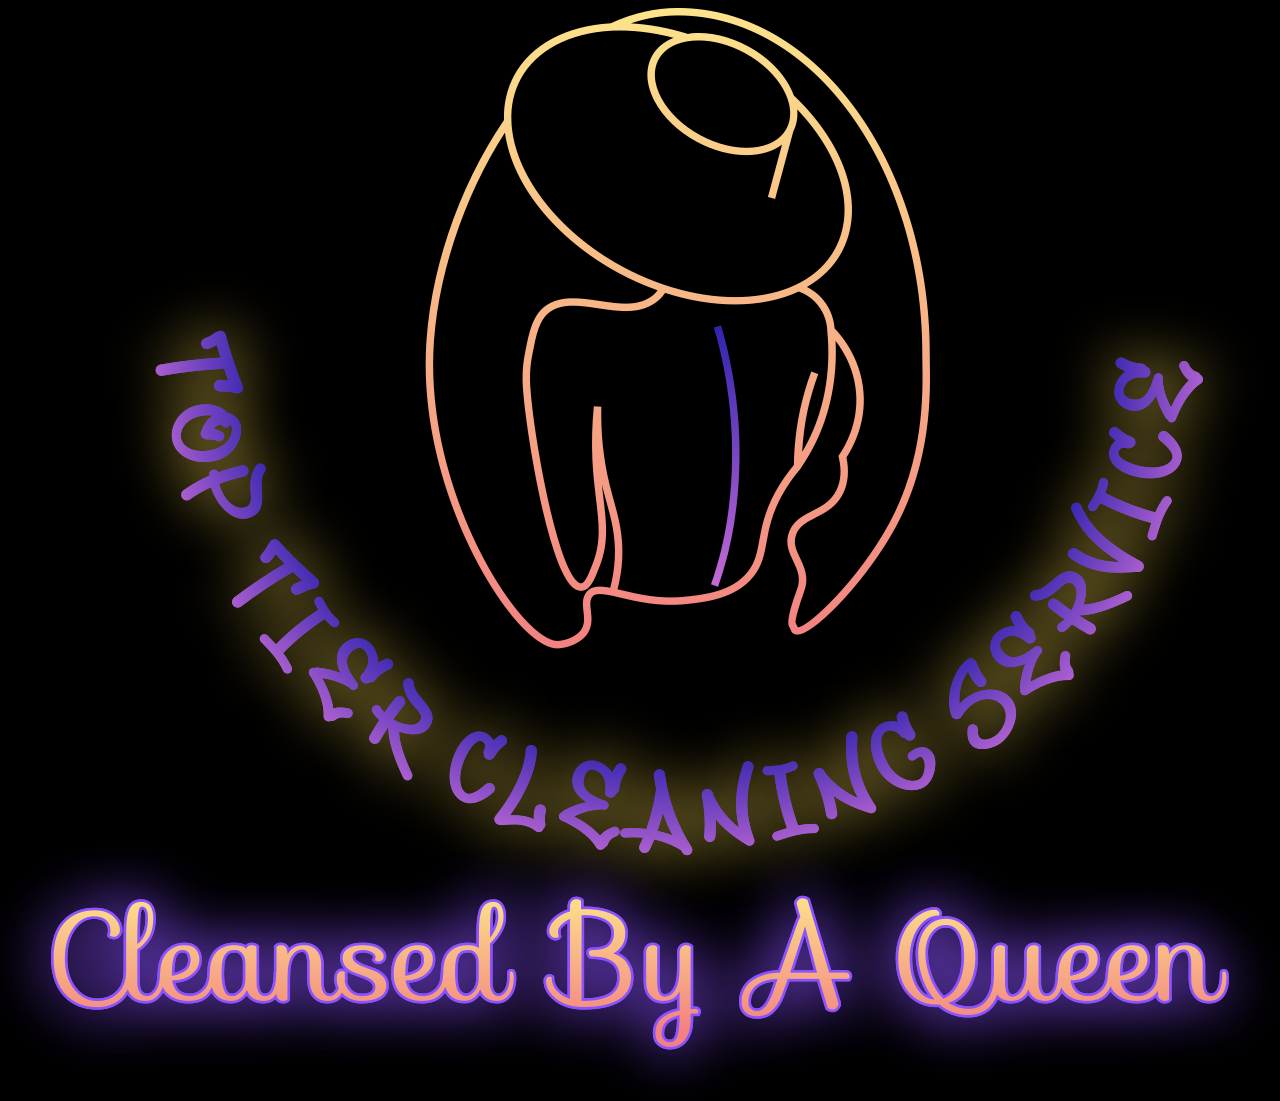 Top Tier Cleaning Service 's logo